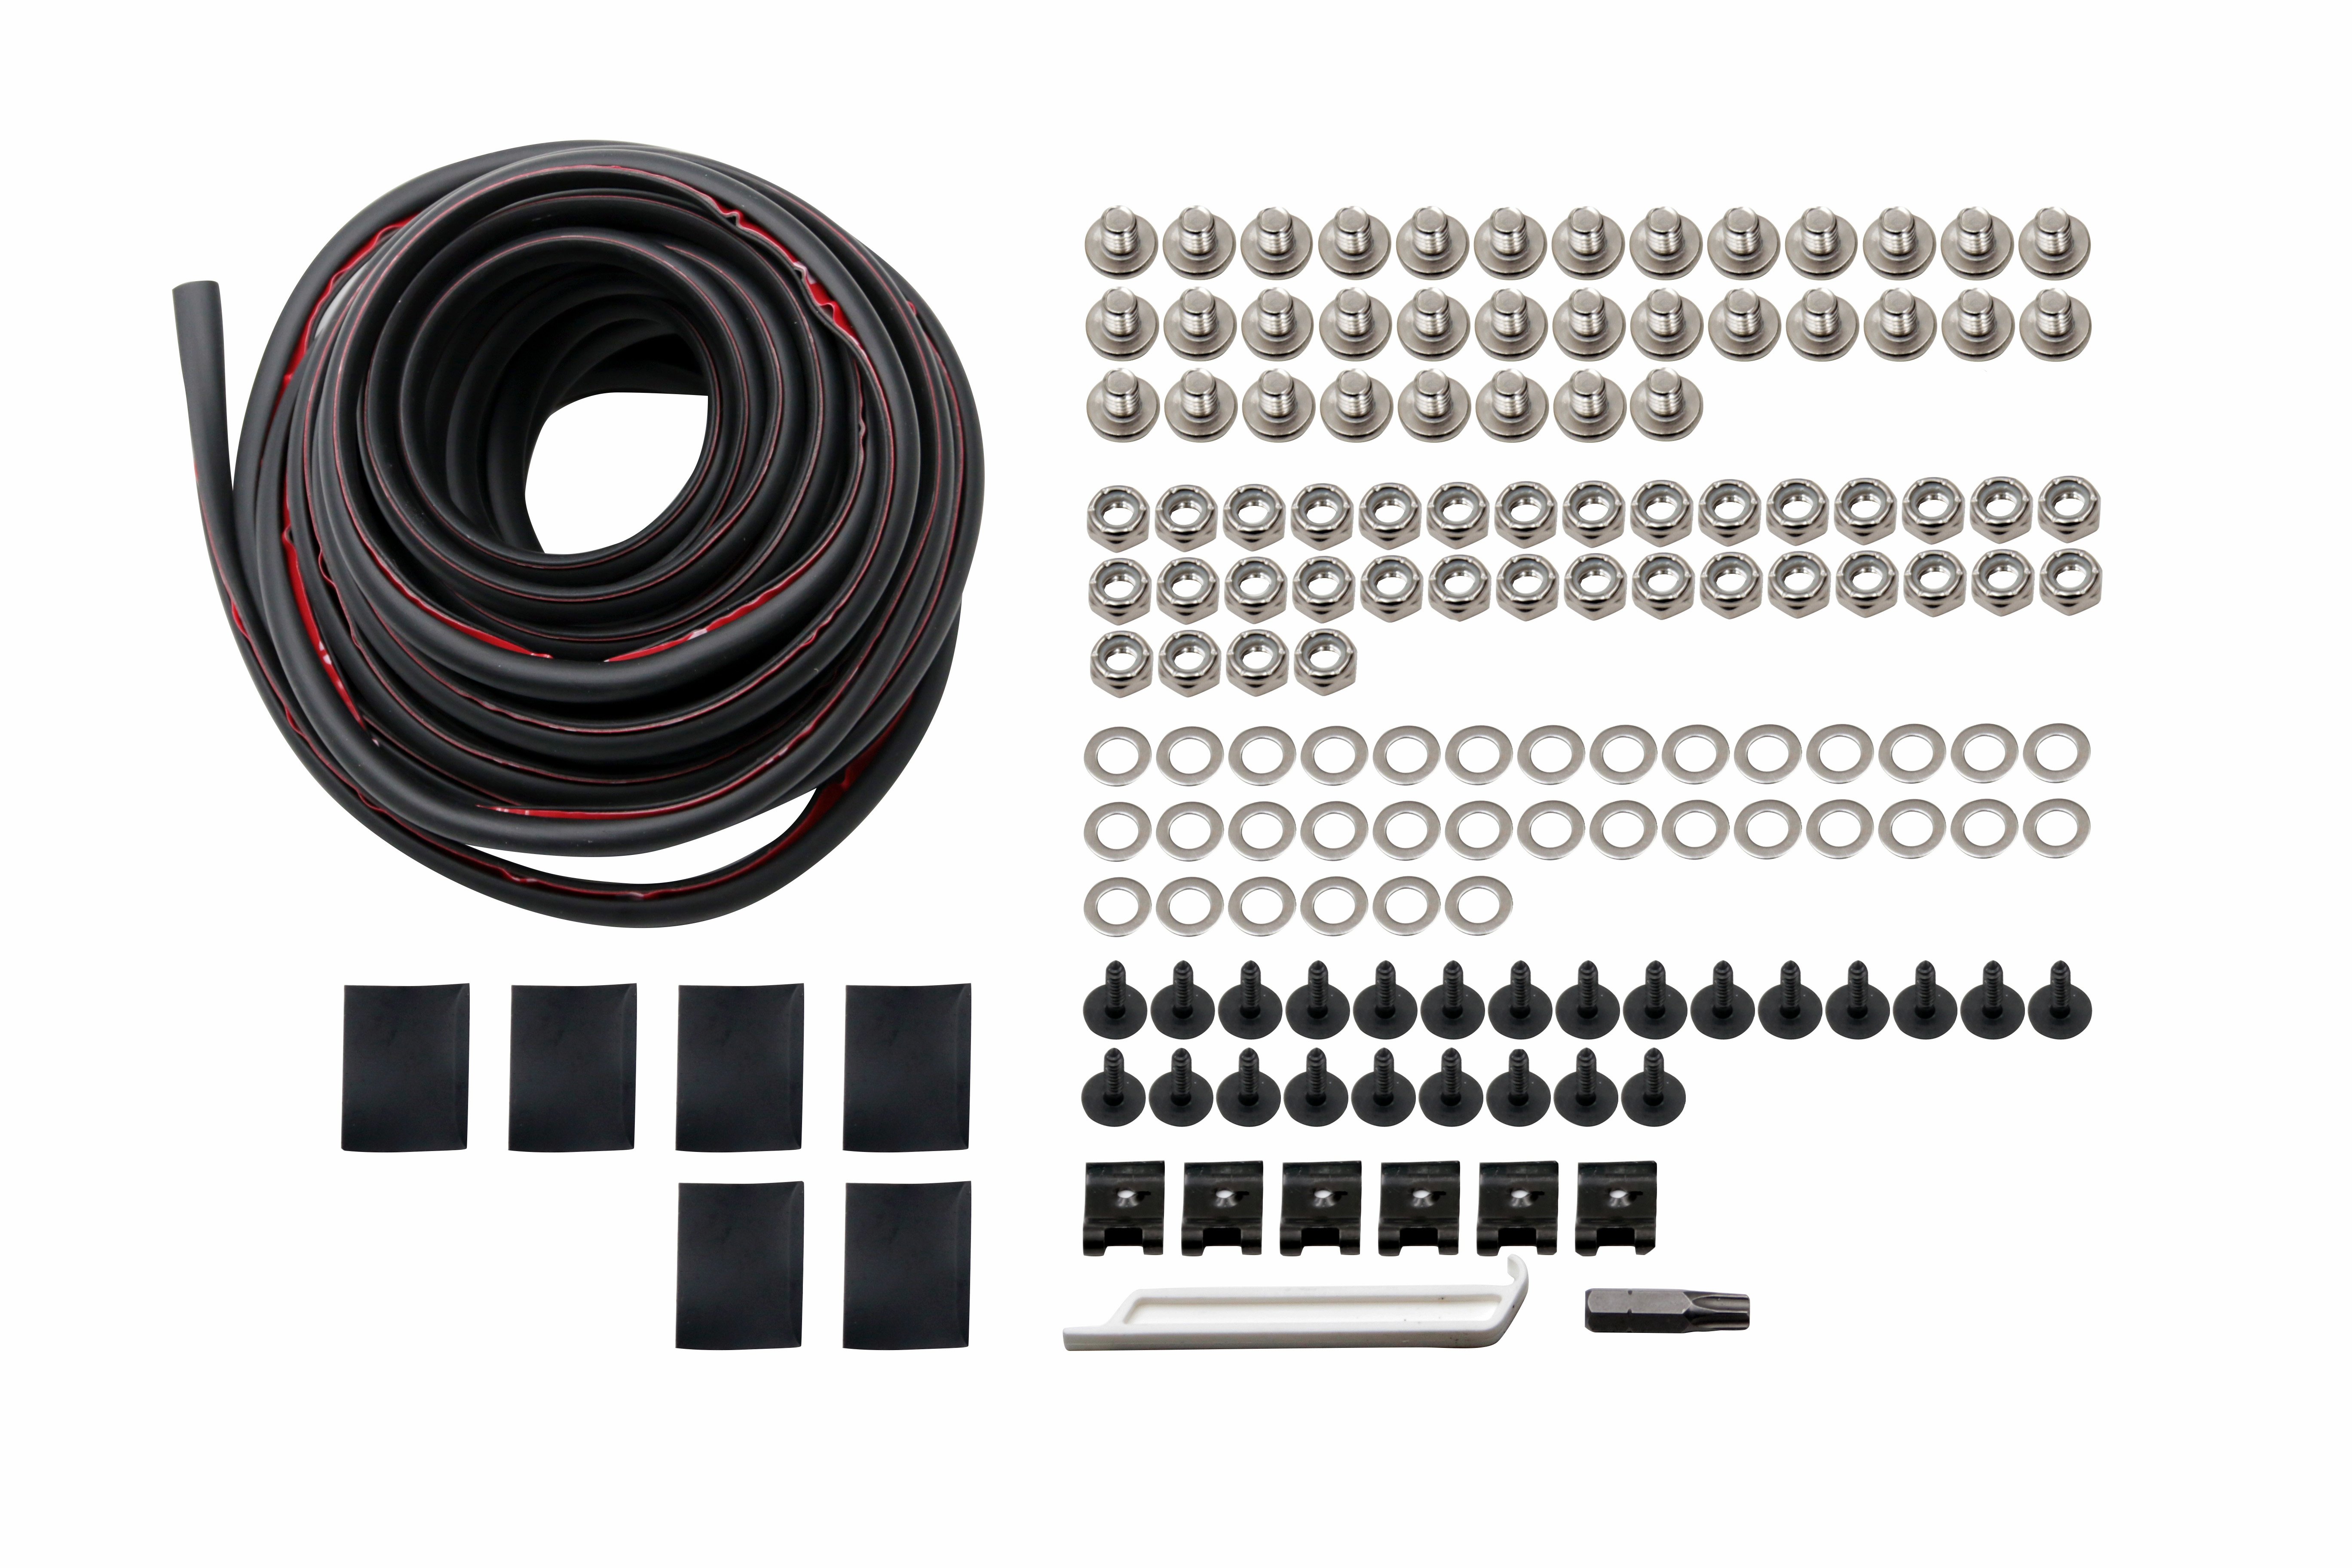 SP-FF4148 Hardware kit for TG-FF8D4148 and TG-FF8D4147